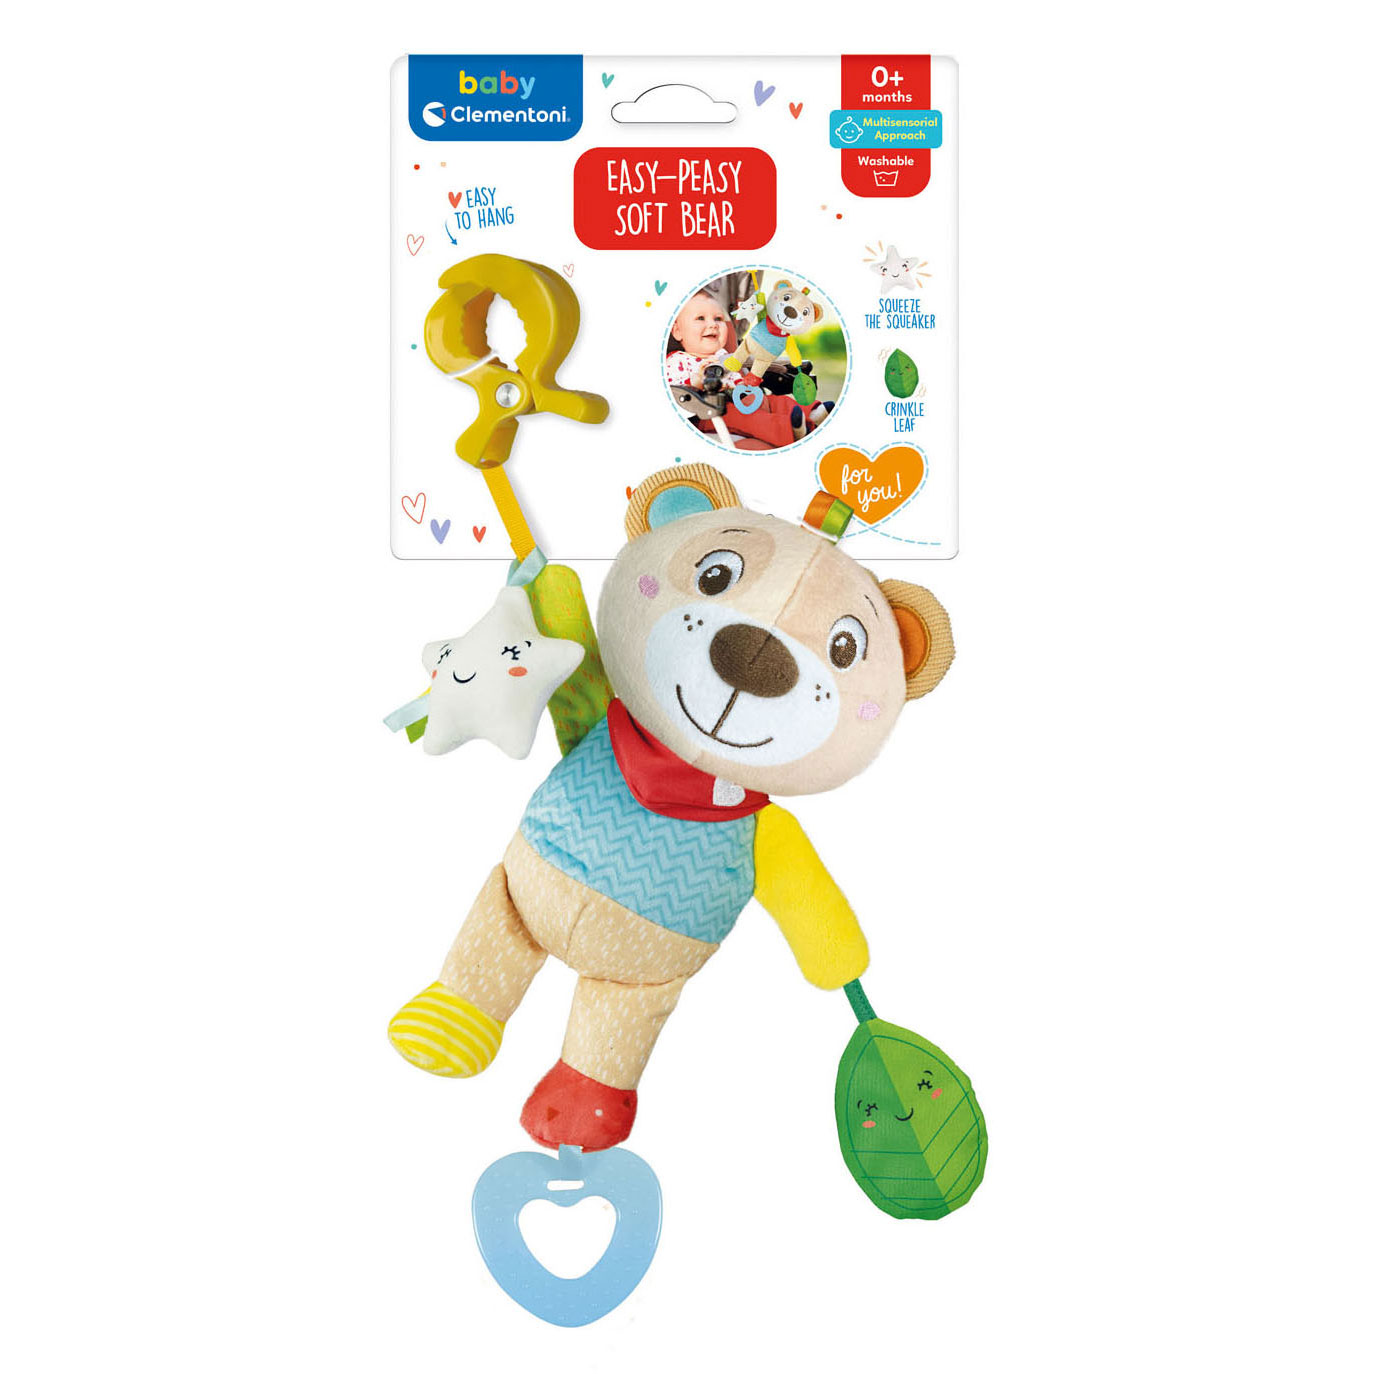 Clementoni Baby - Ours tout doux Easy-Peasy